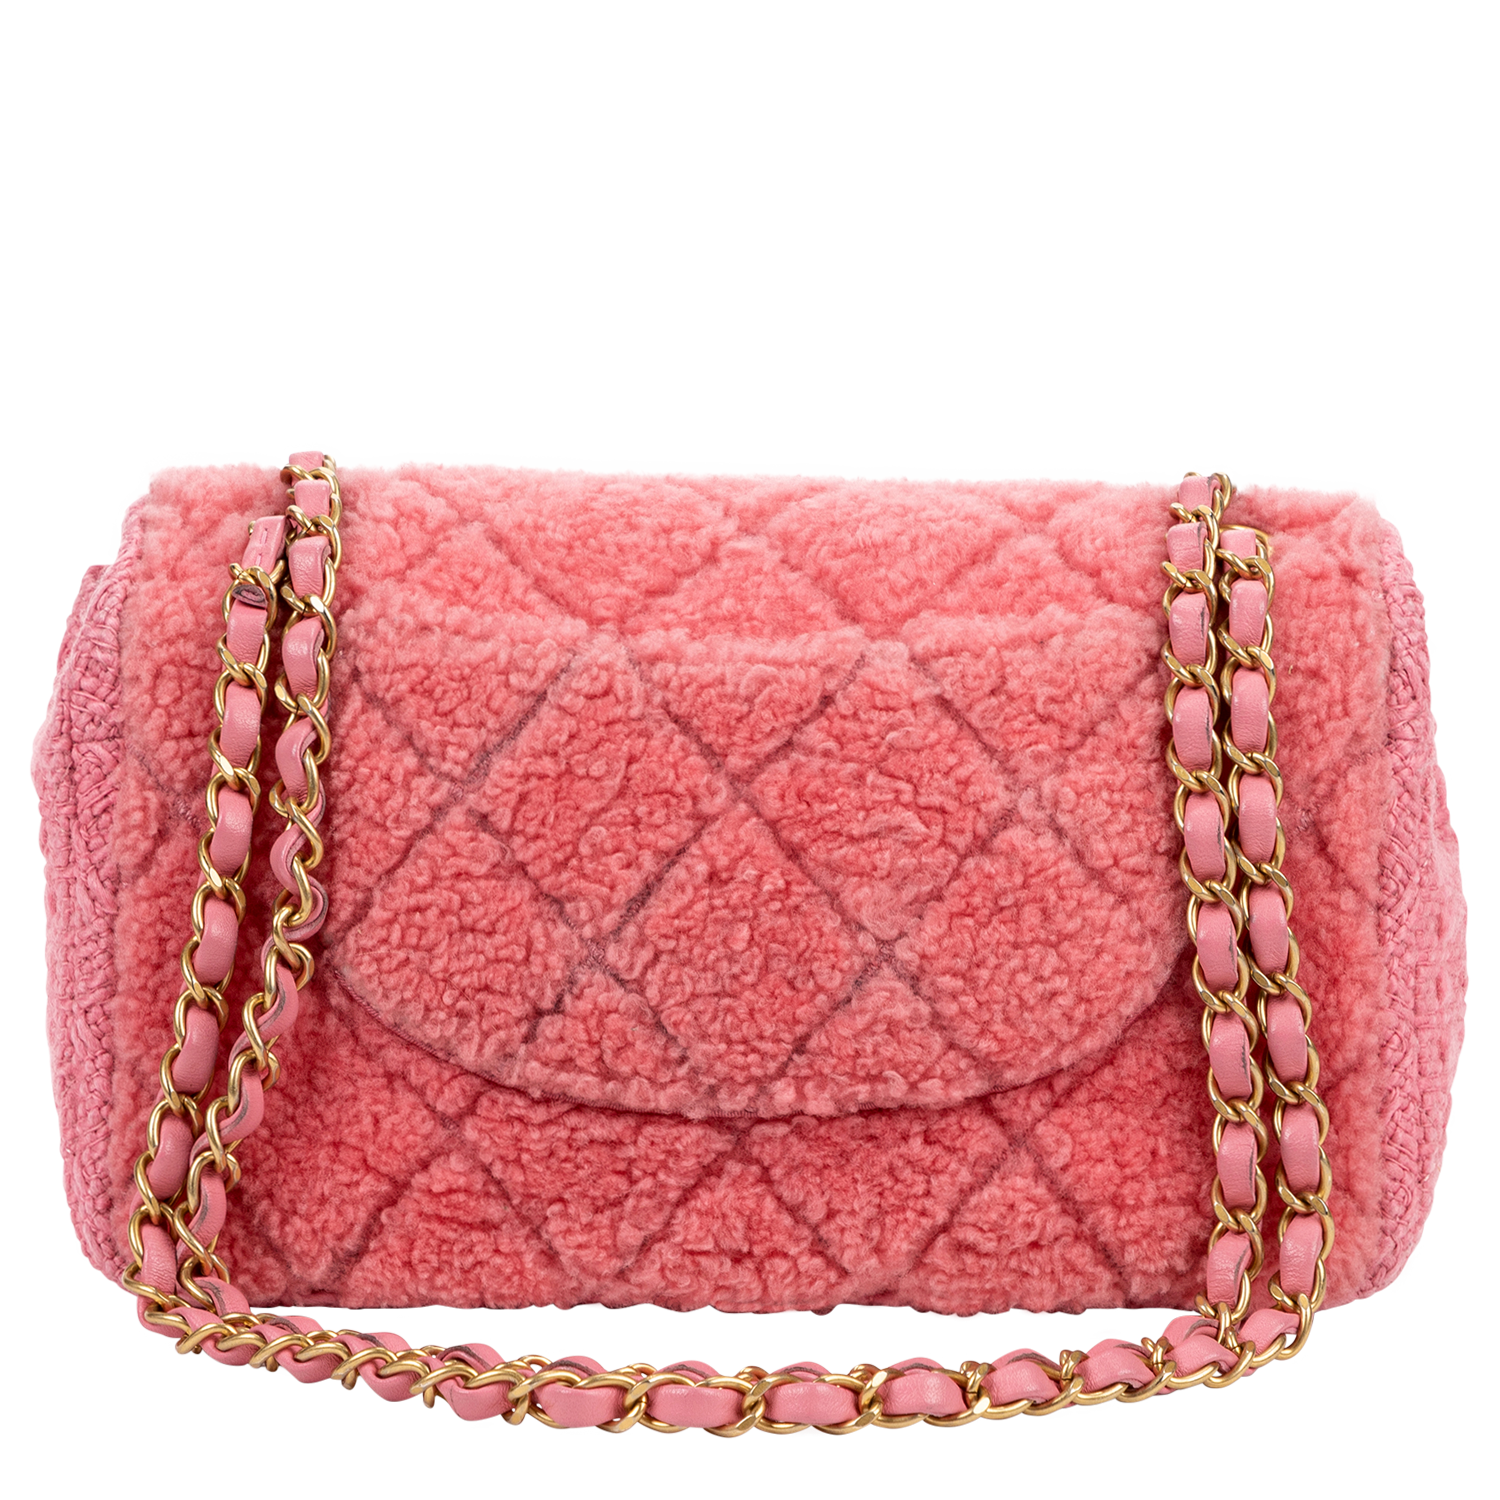 Chanel 2020 Limited Edition Pink Tweed Furry Flap Bag - shop 